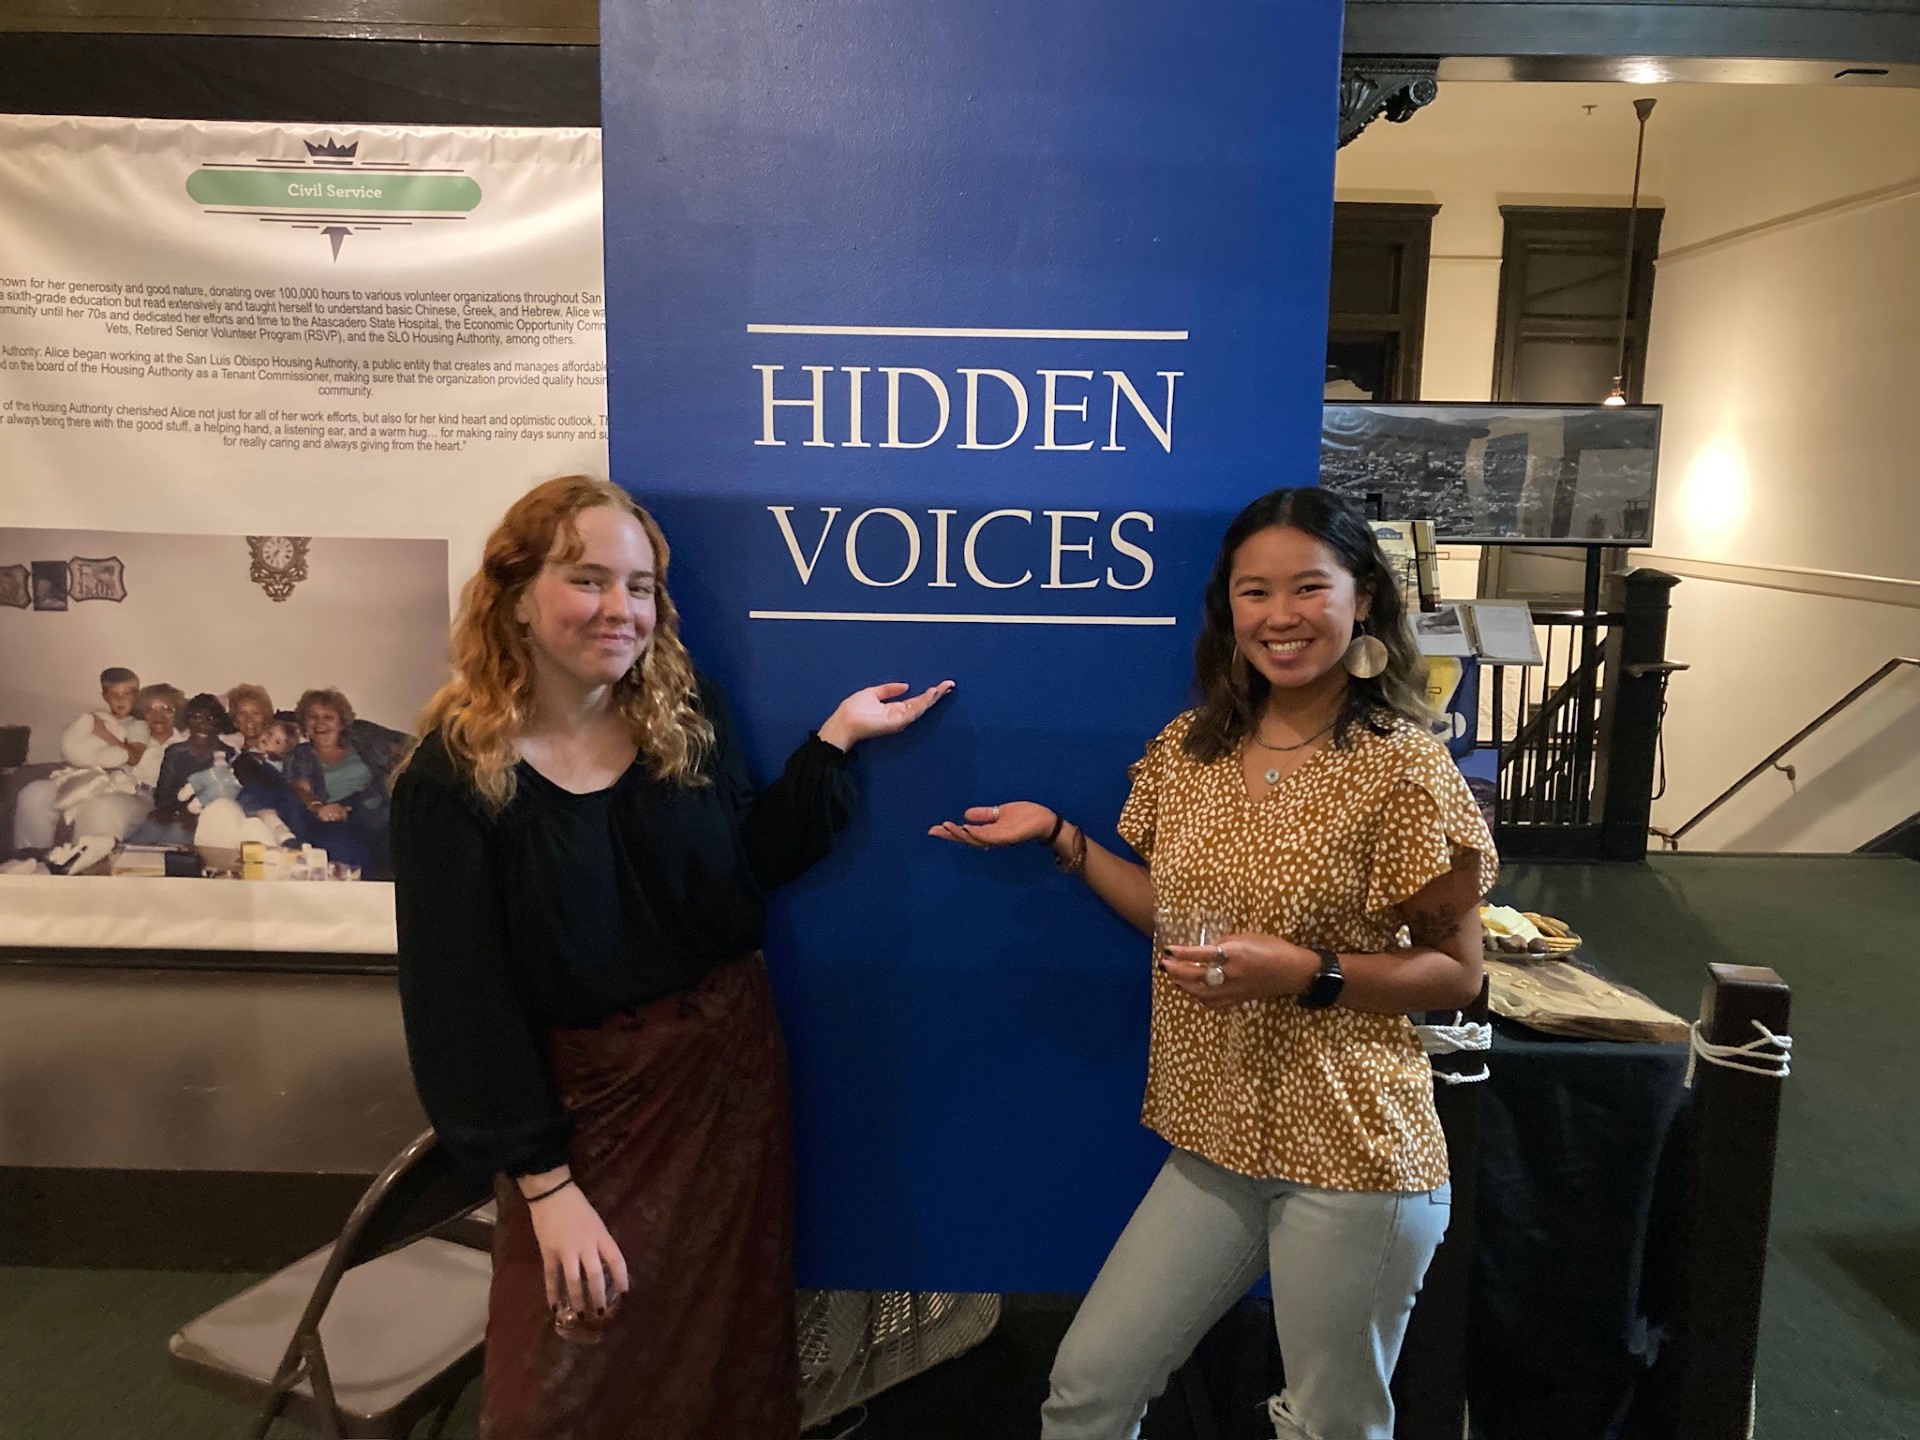 Two students stand in front of a blue poster reading 'Hidden Voices' during opening night of a historical exhibit.